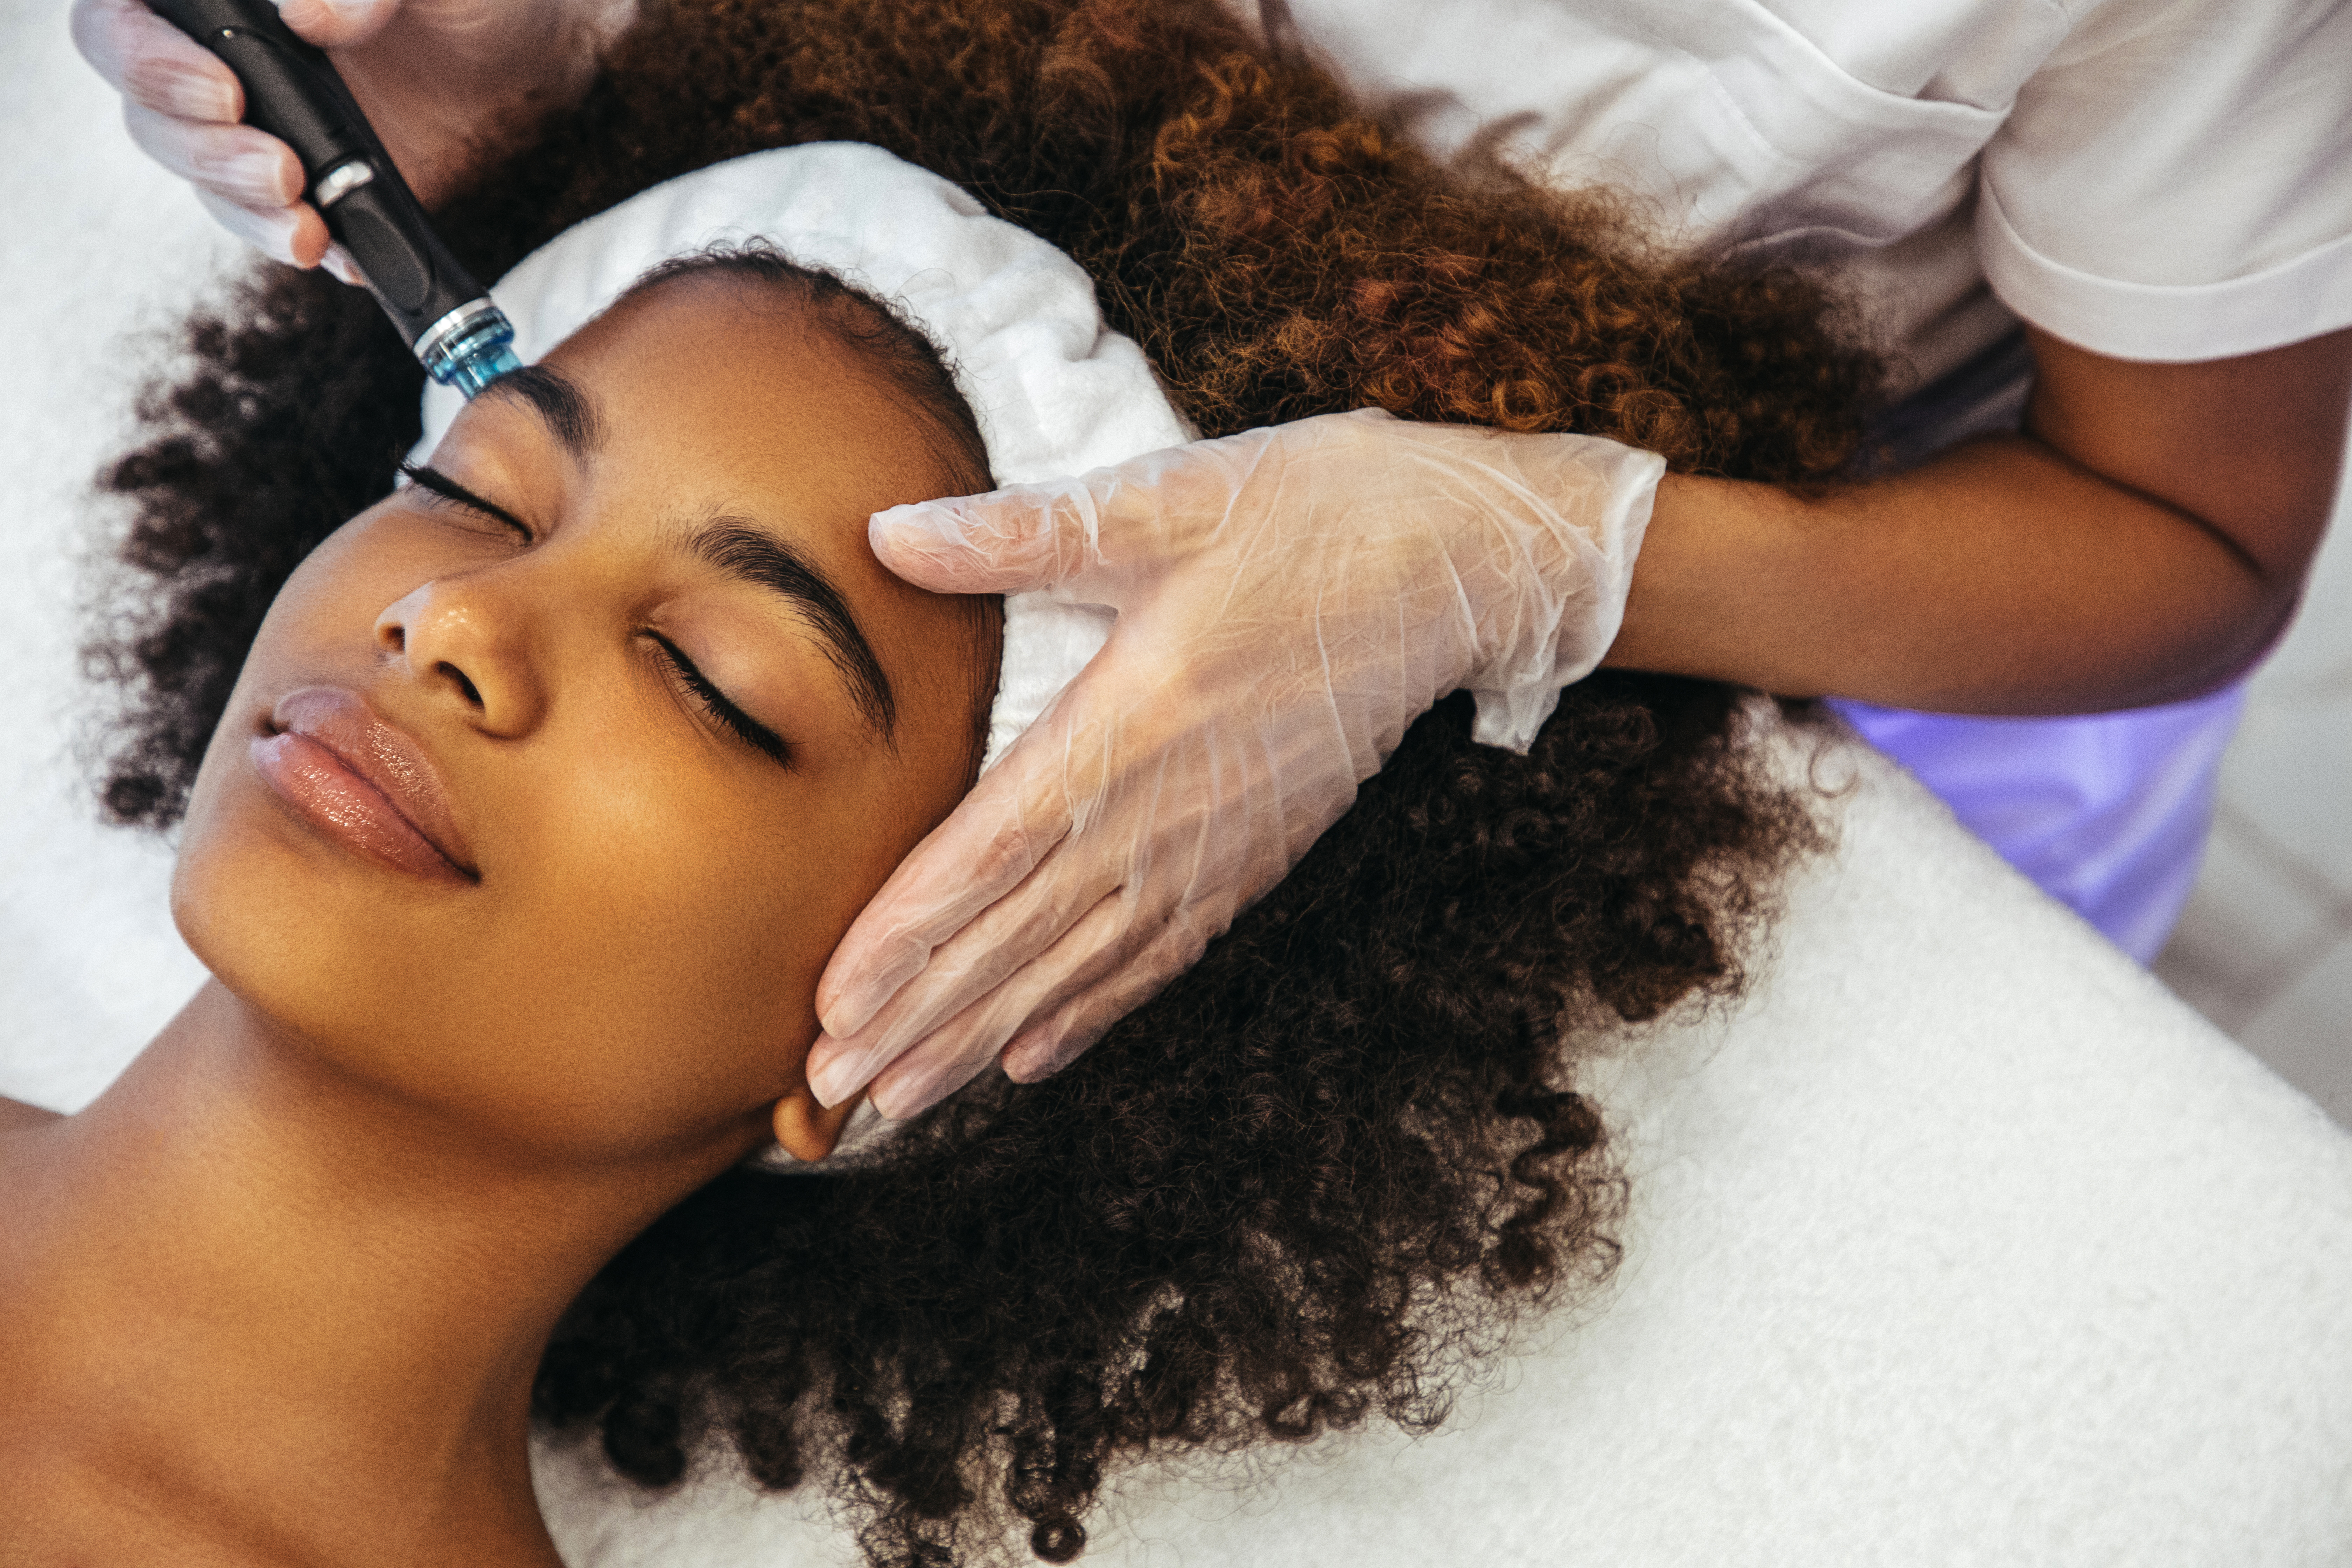 Regency Specialties Blog | The Rise of Medspa in Phoenix: What You Need to Know